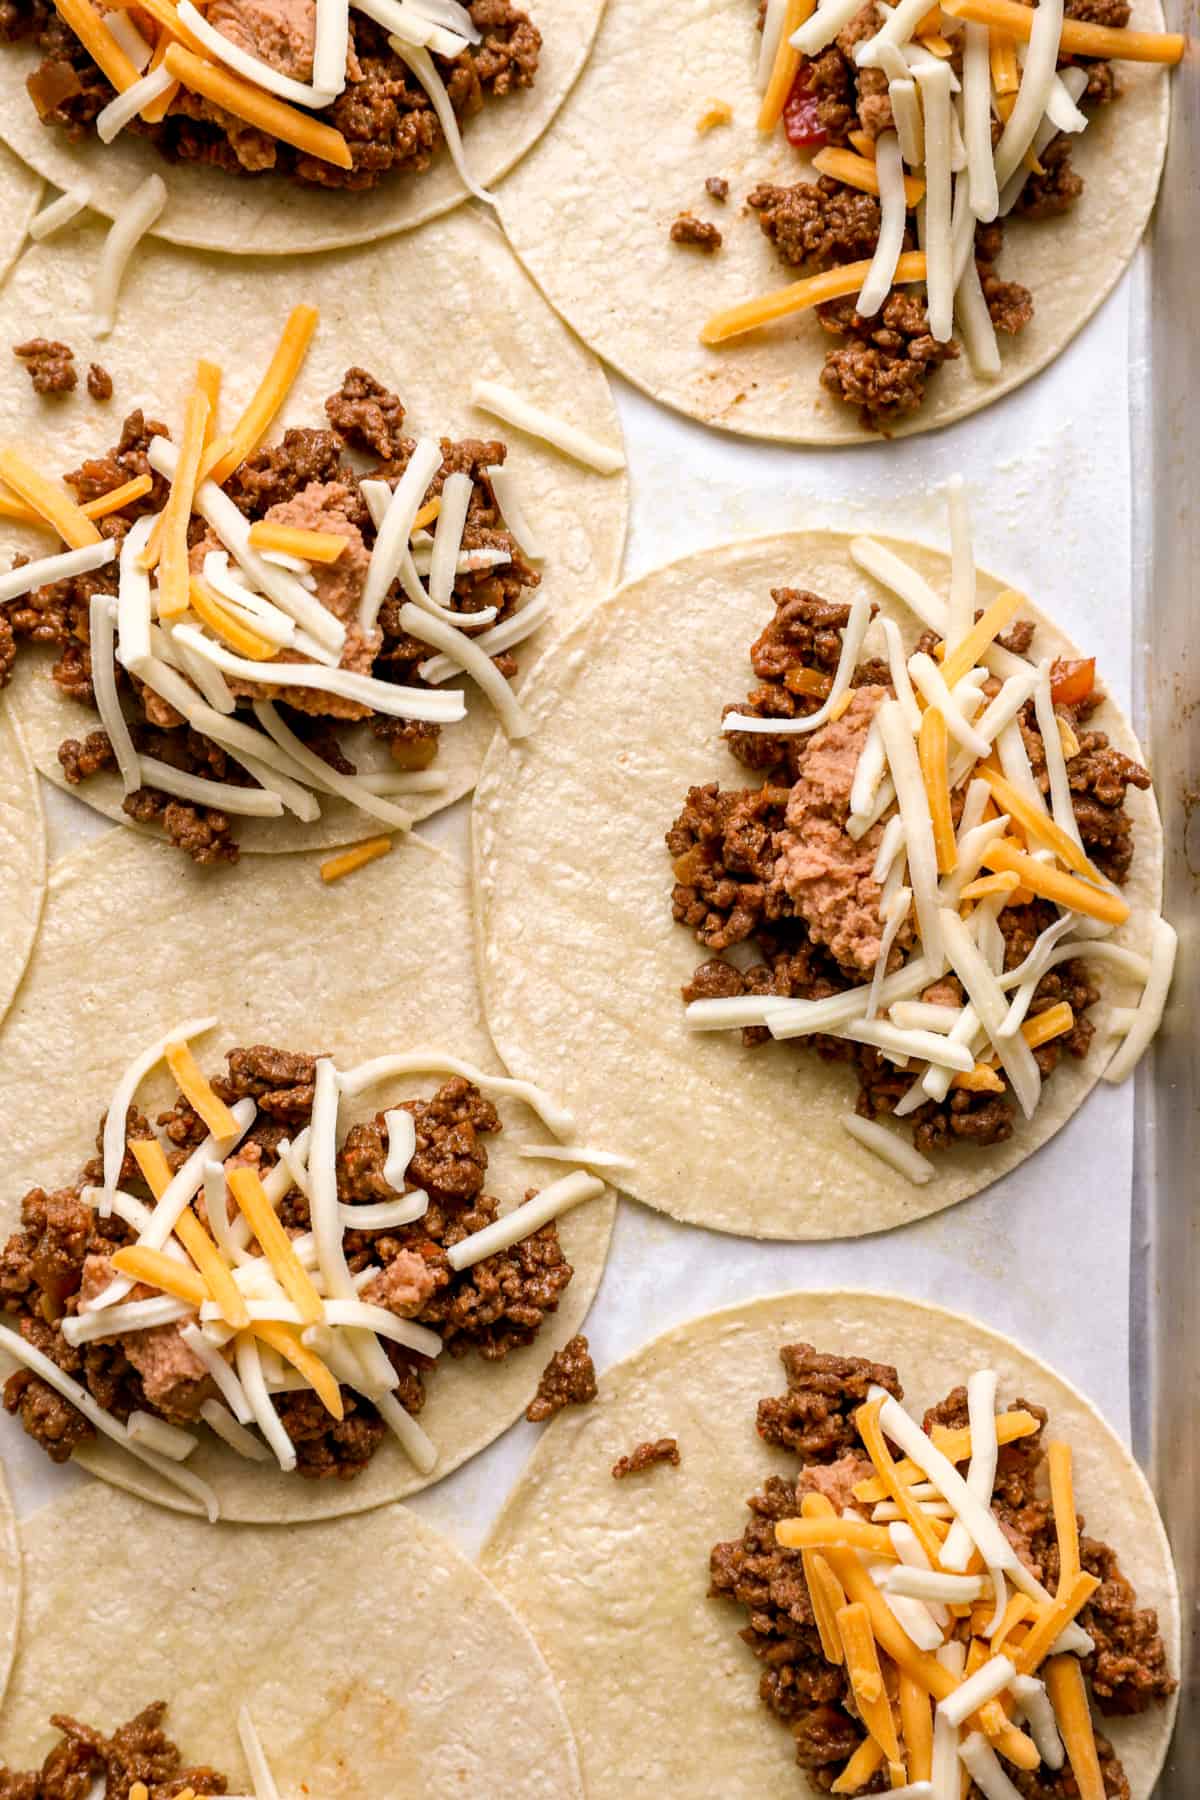 Tacos topped with ground beef, beans and cheese.